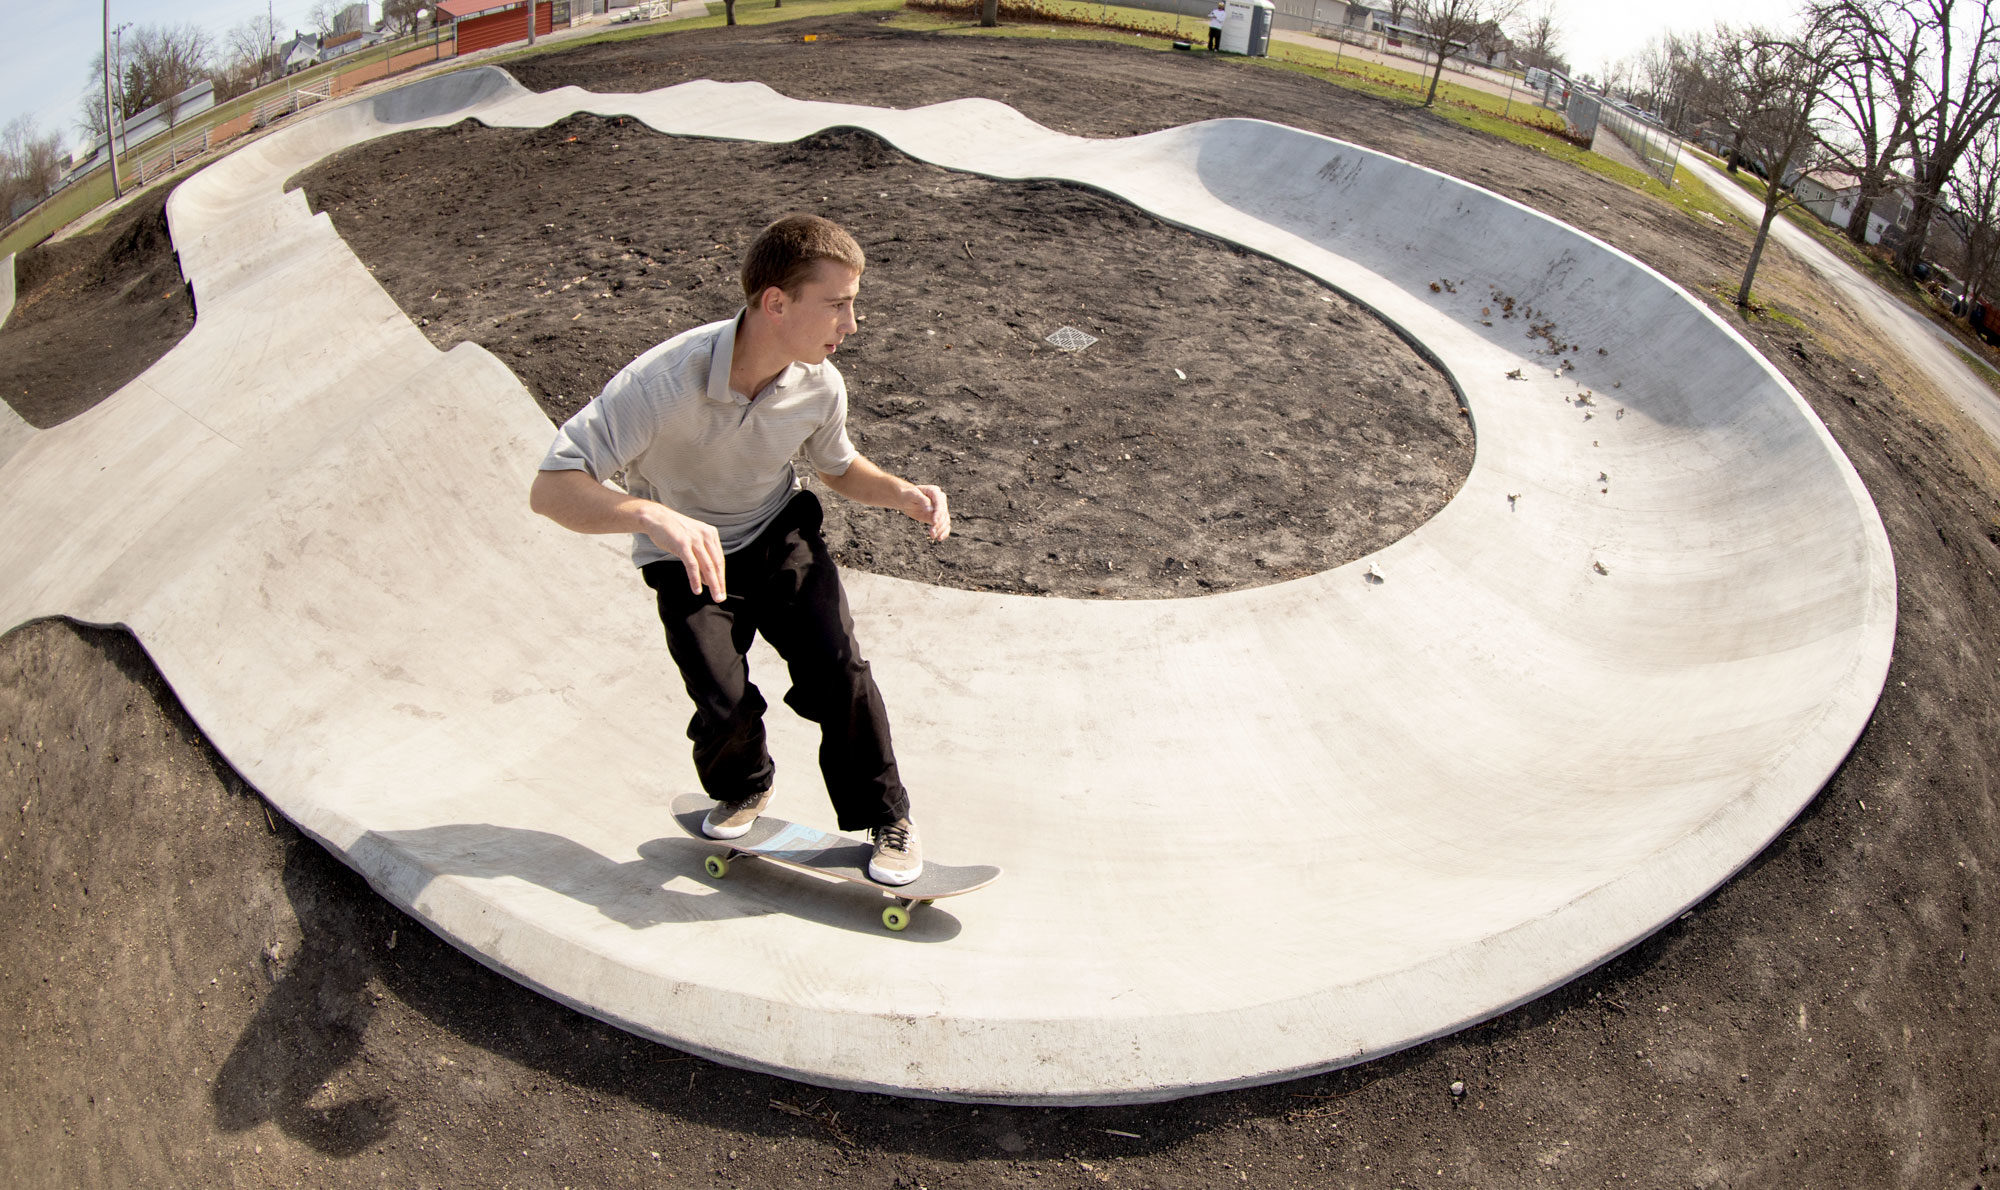 frontside carve in the pump track at Ed Day Memorial Skatepark in Gibson City, IL